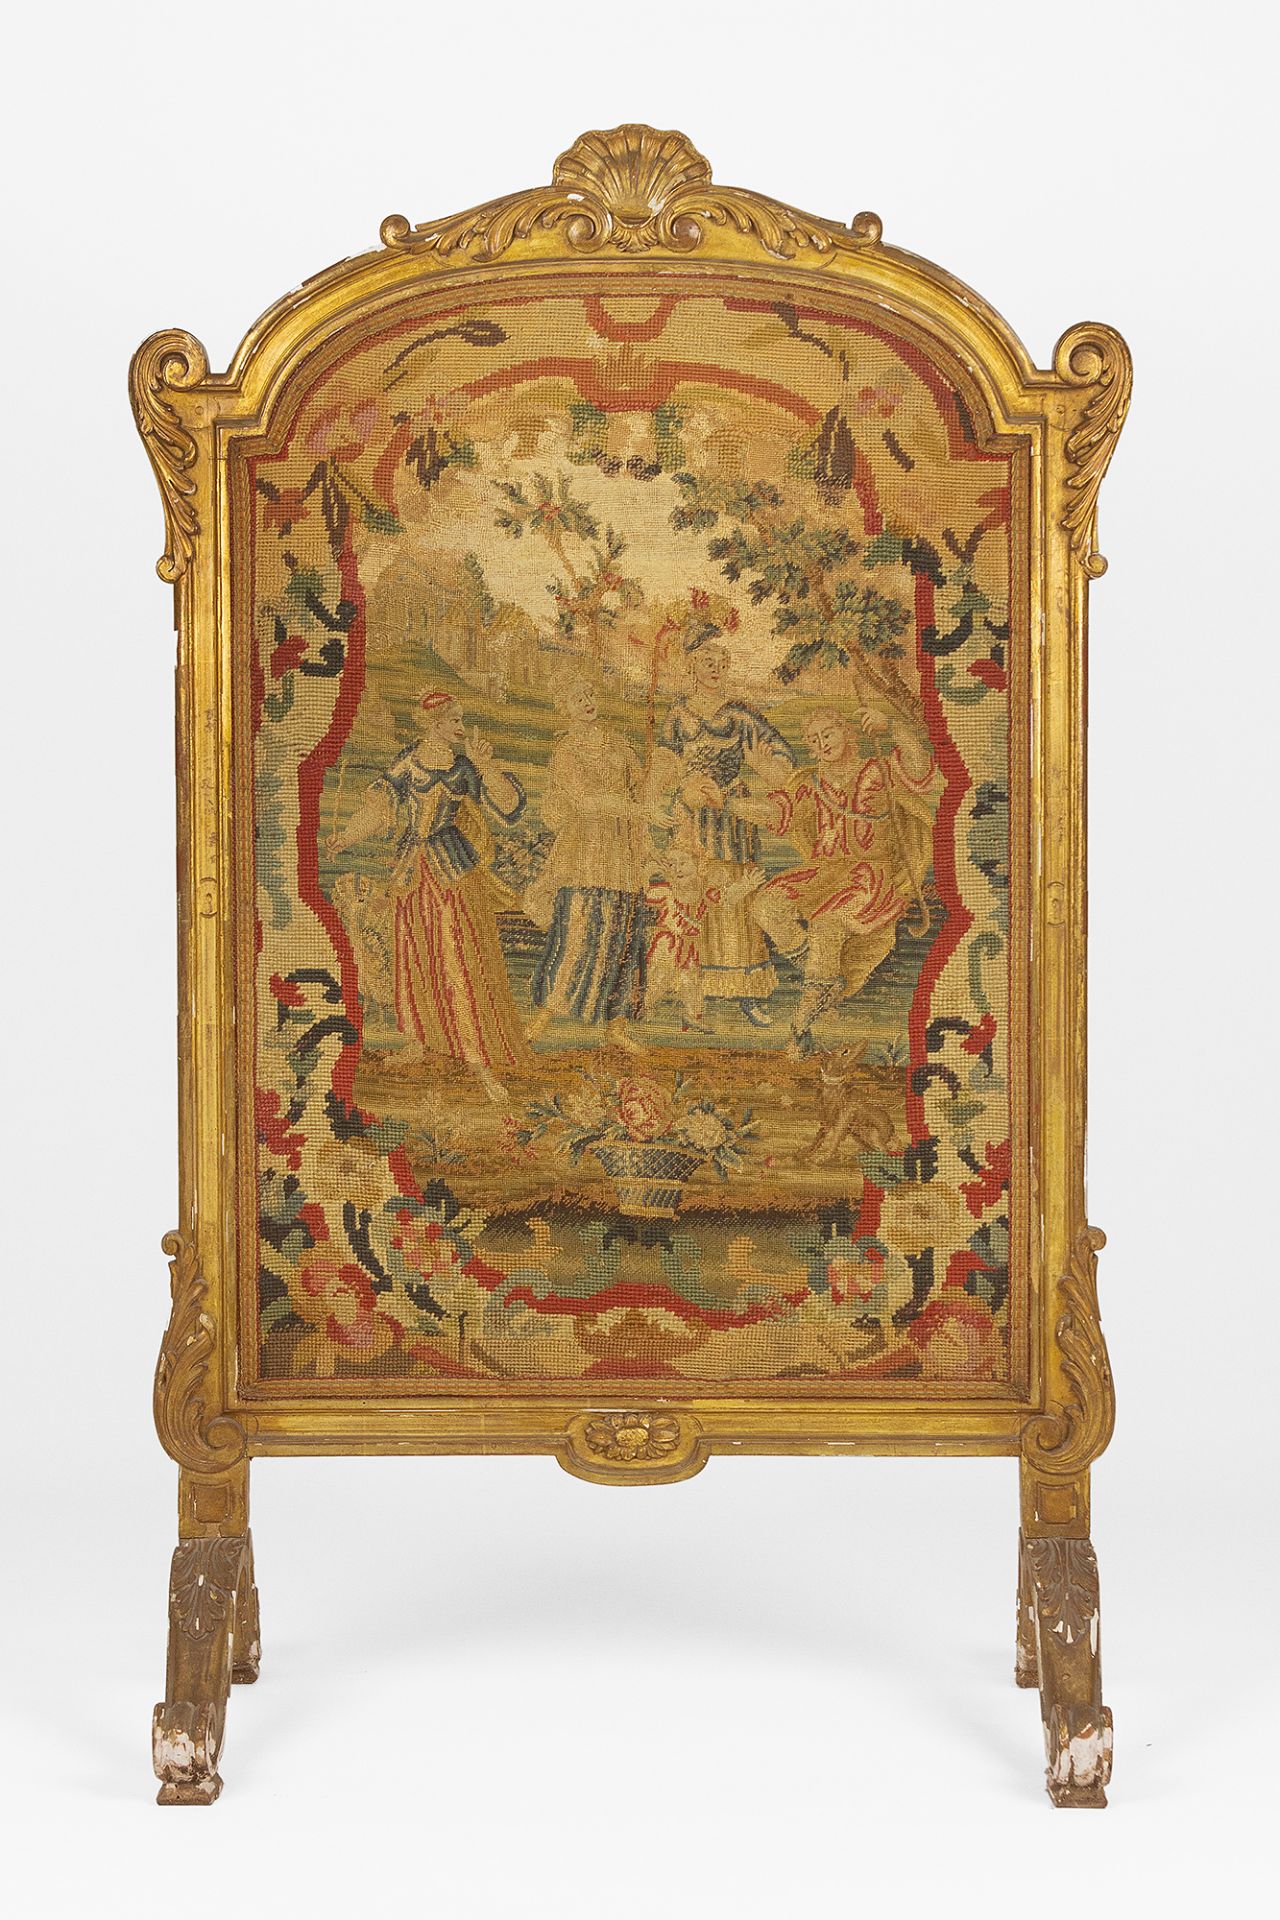 A 19th century Louis XVI style petit point fire screen - Image 8 of 8